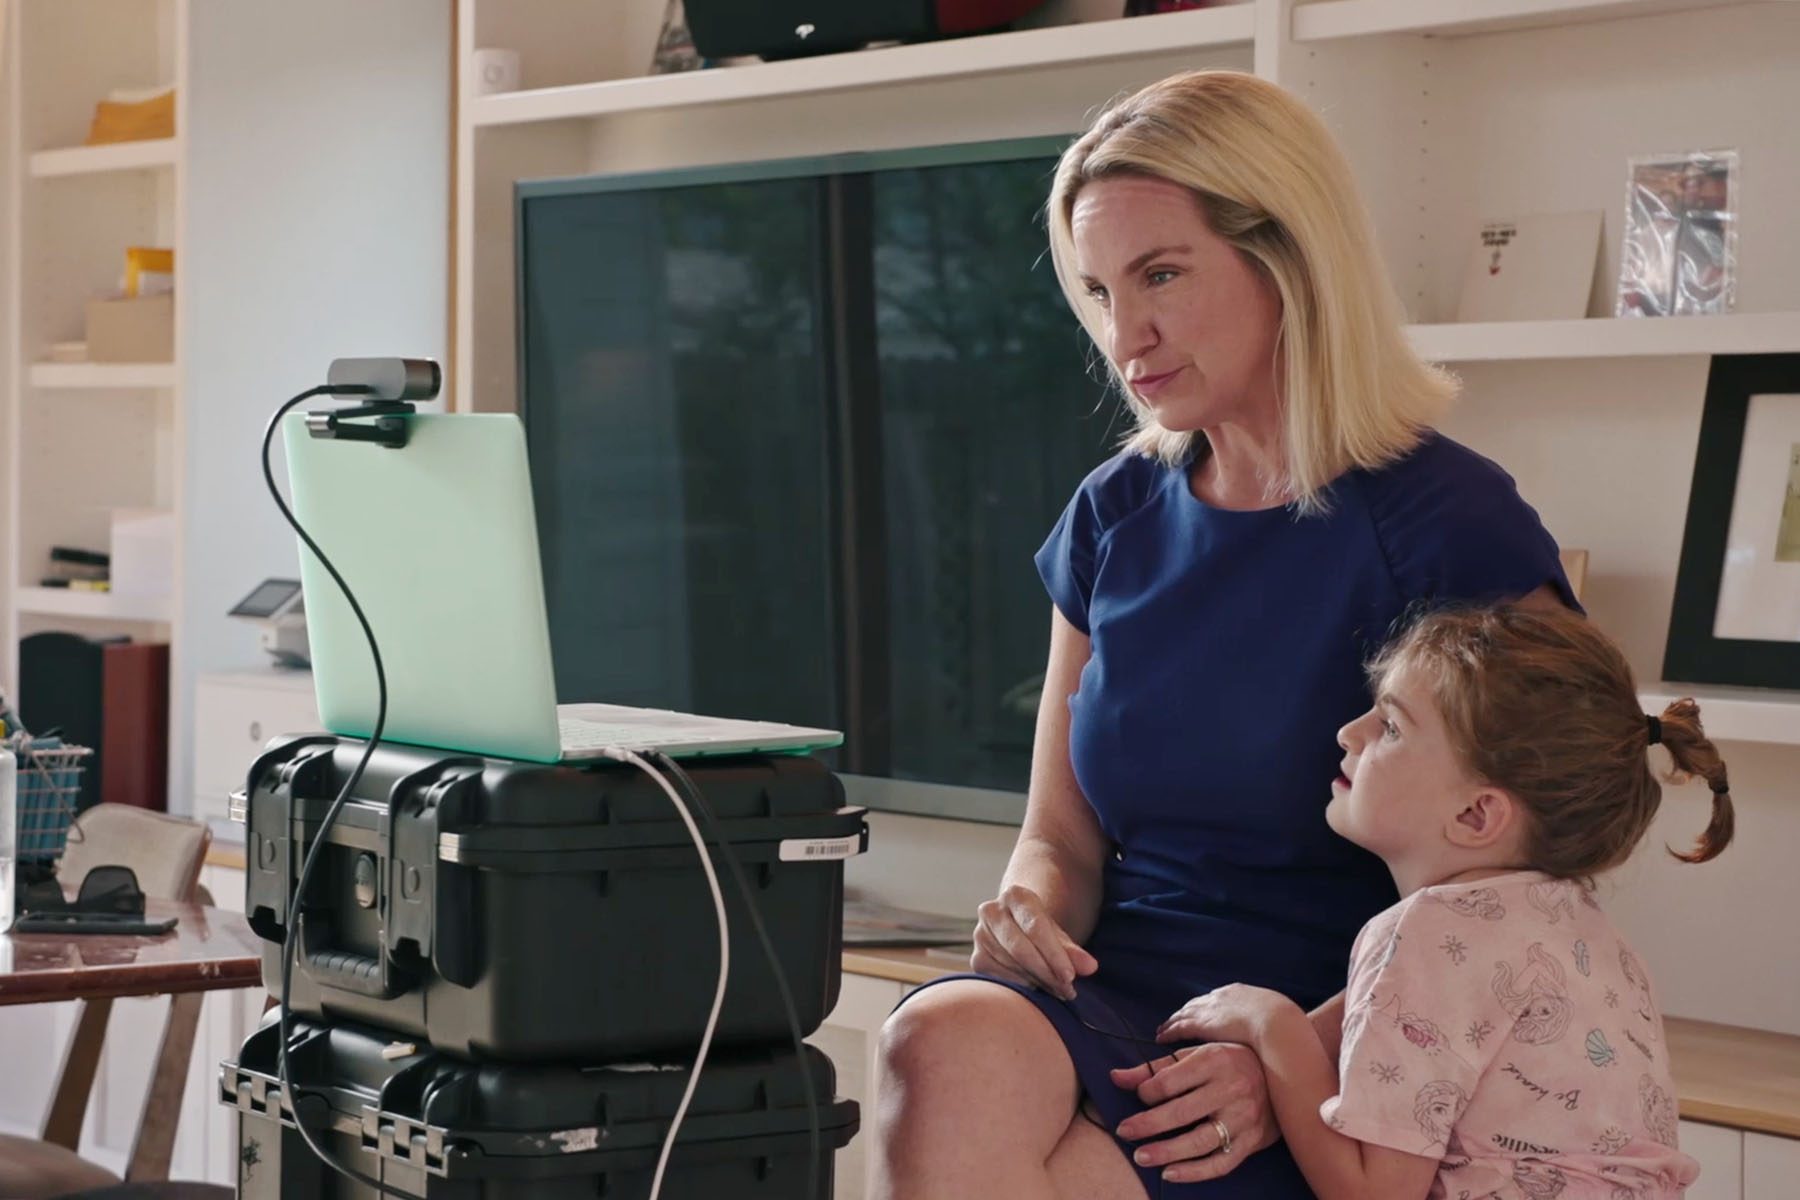 A still from Breaking The News shows 19th co-founder and CEO Emily Ramshaw getting ready for an interview with her young daughter by her side.